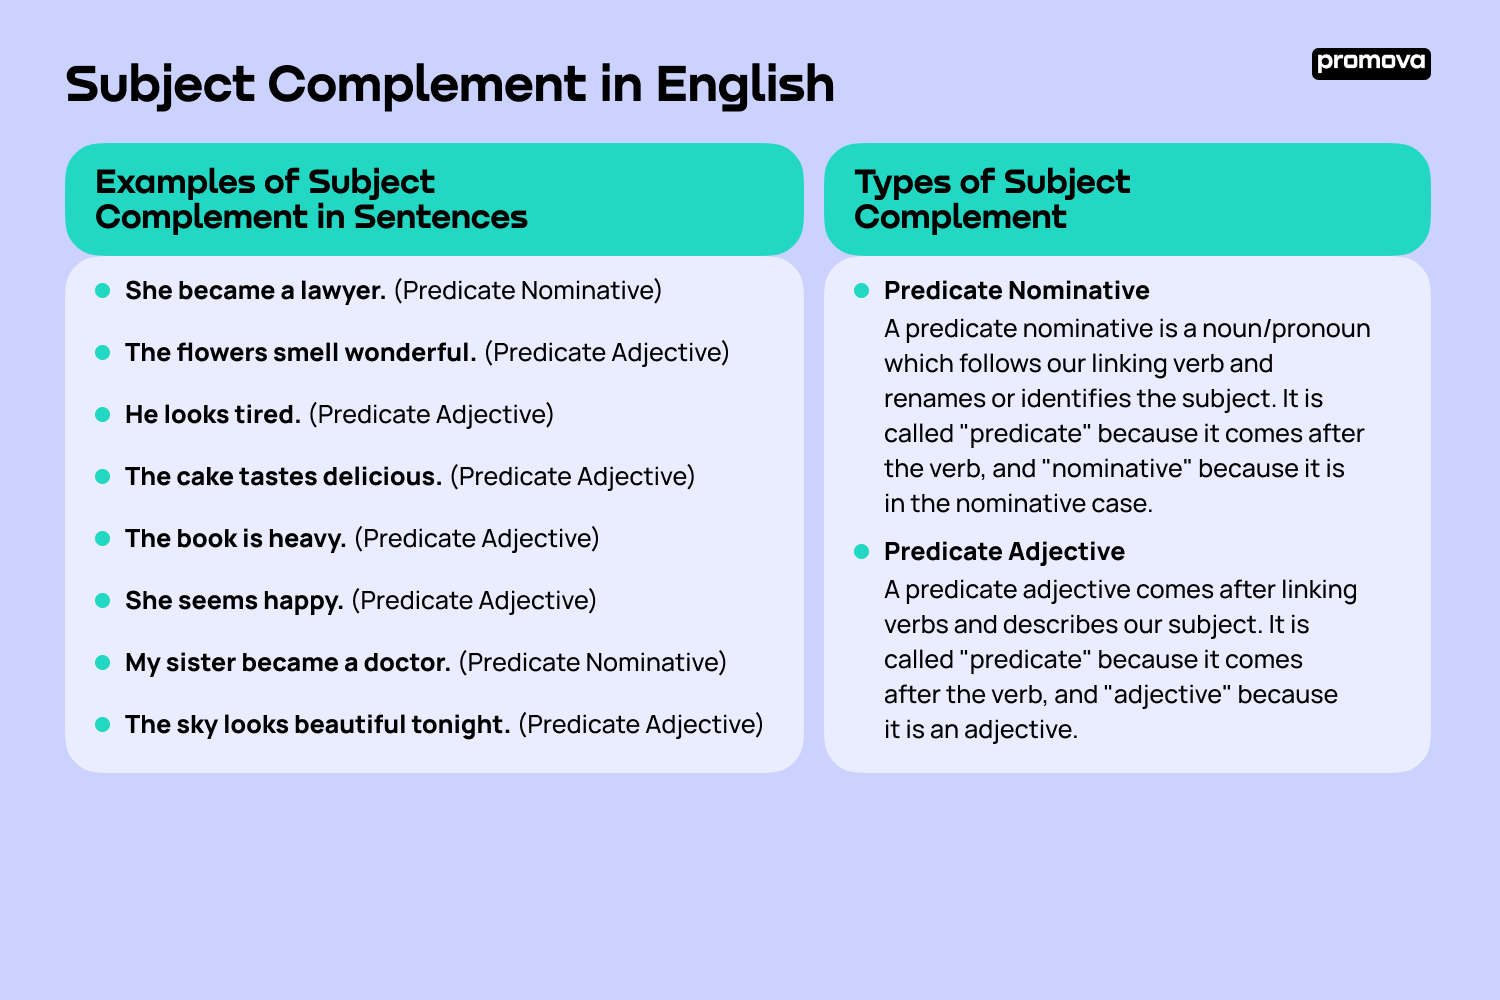 Examples of Subject Complement in Sentences